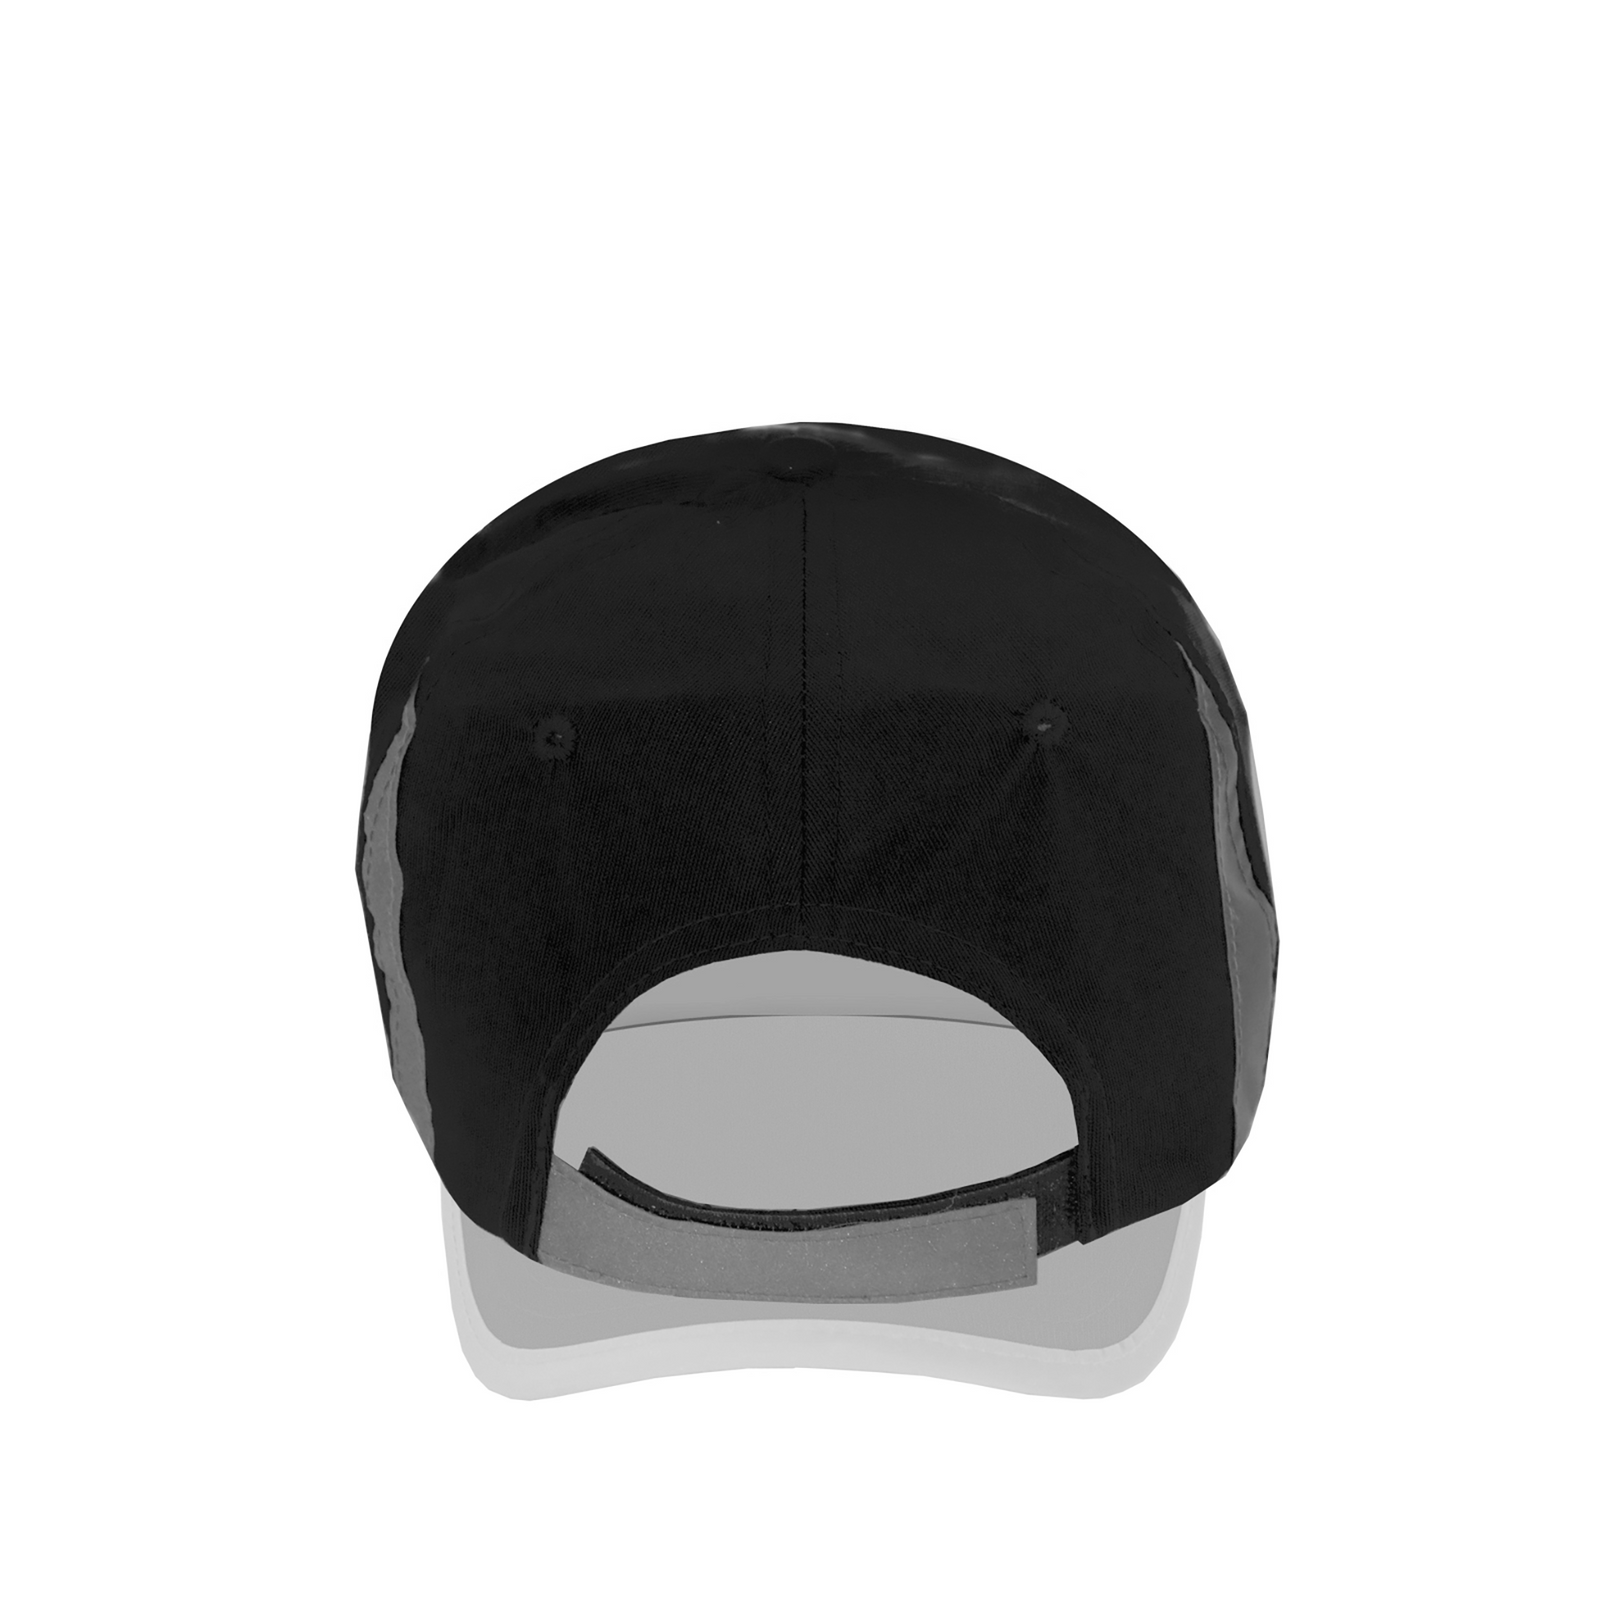 Back view of the Hi-vis black JORESTECH safety cap with reflective stripes over white background